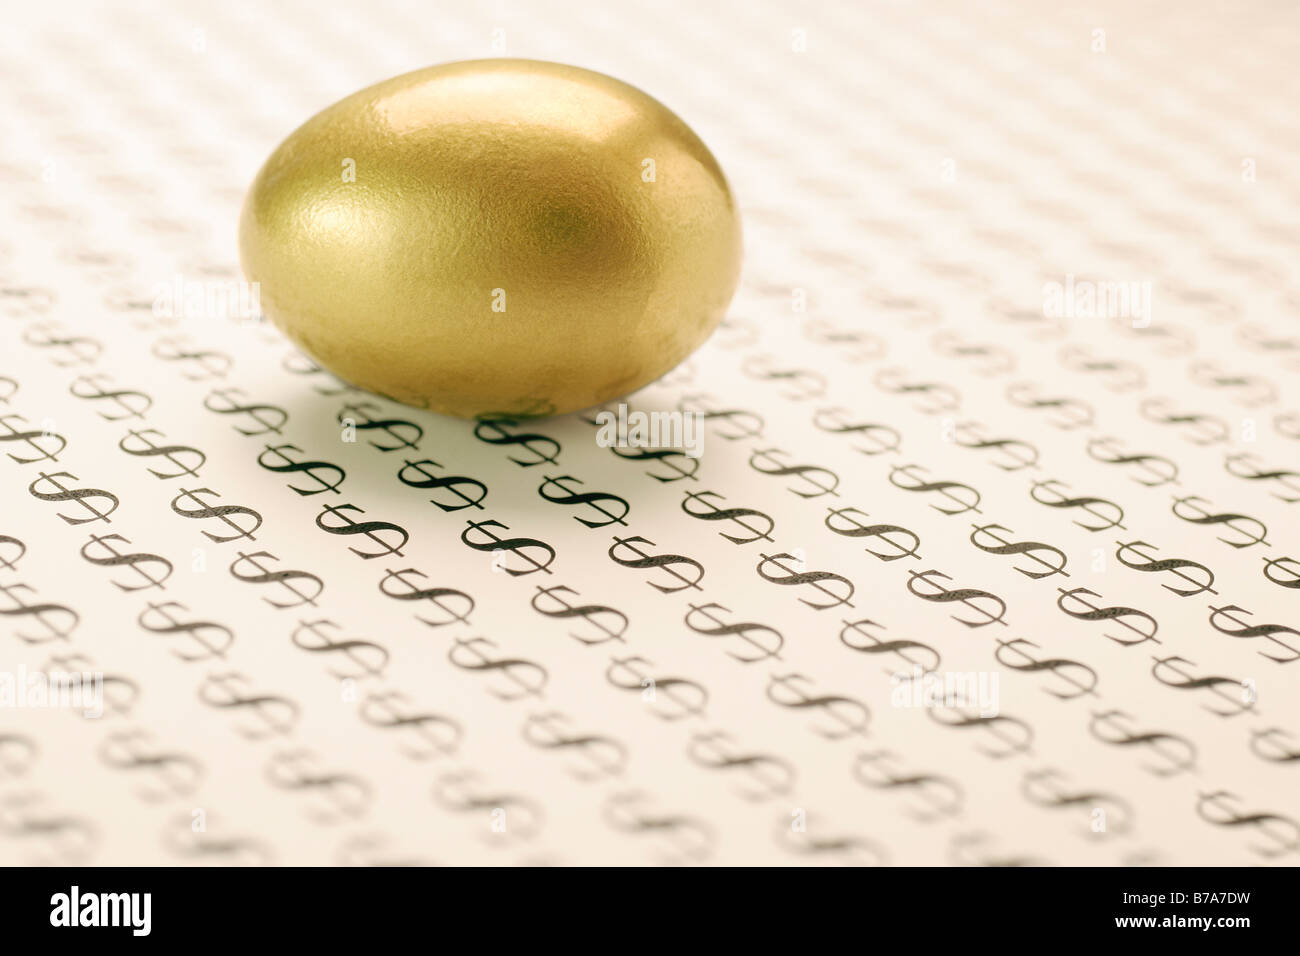 Golden egg and dollar signs Stock Photo